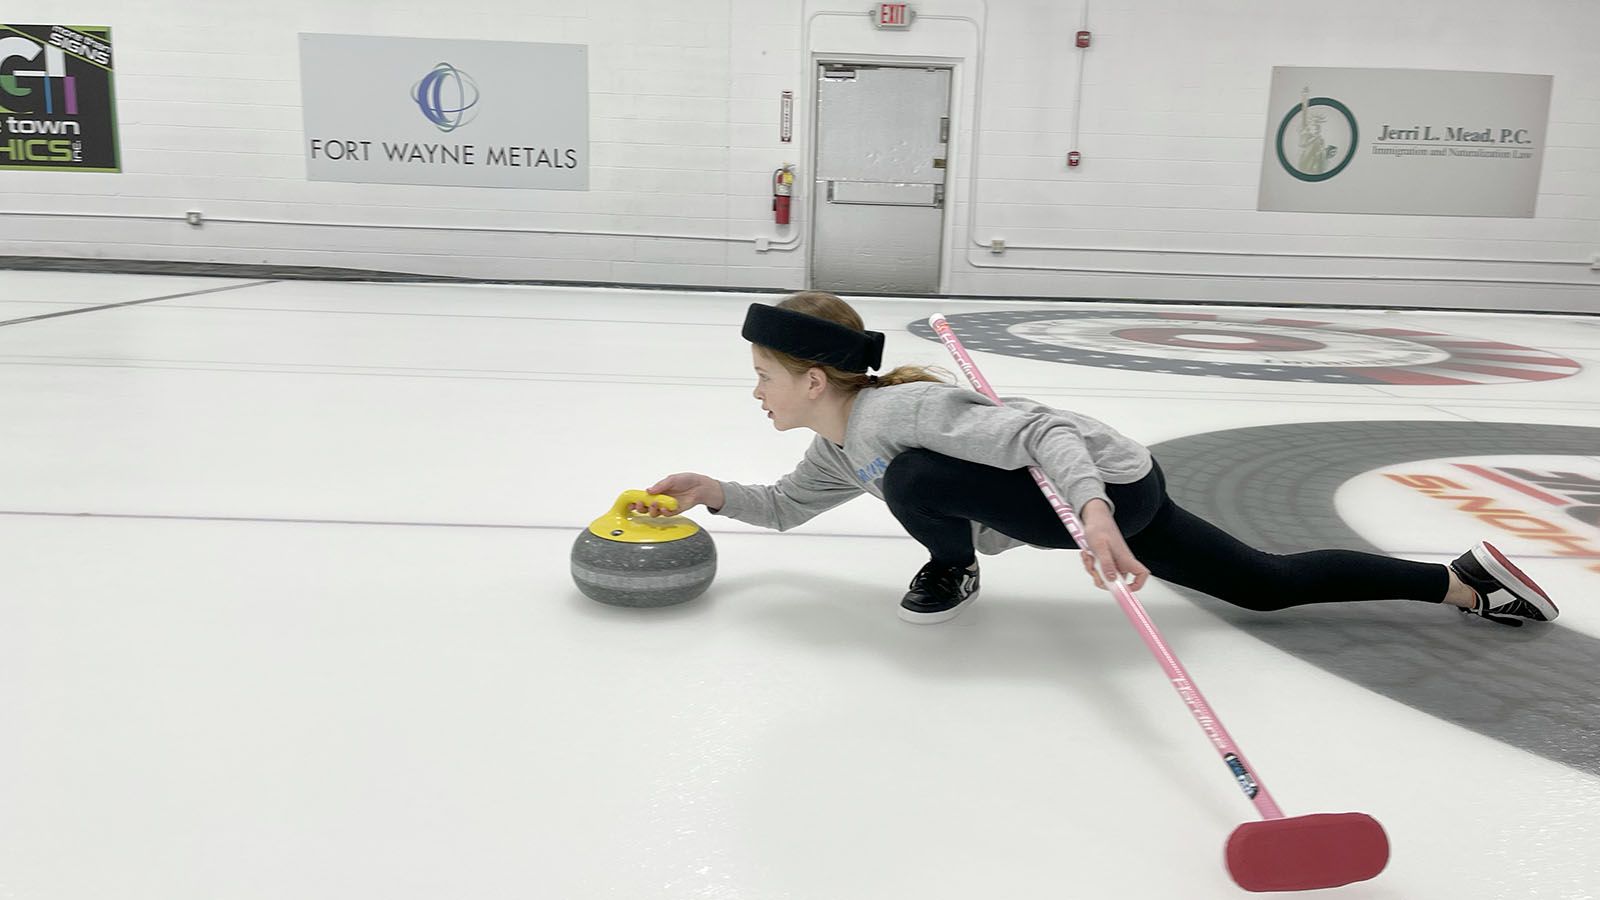 The Fort Wayne Curling Club welcomes young and old.